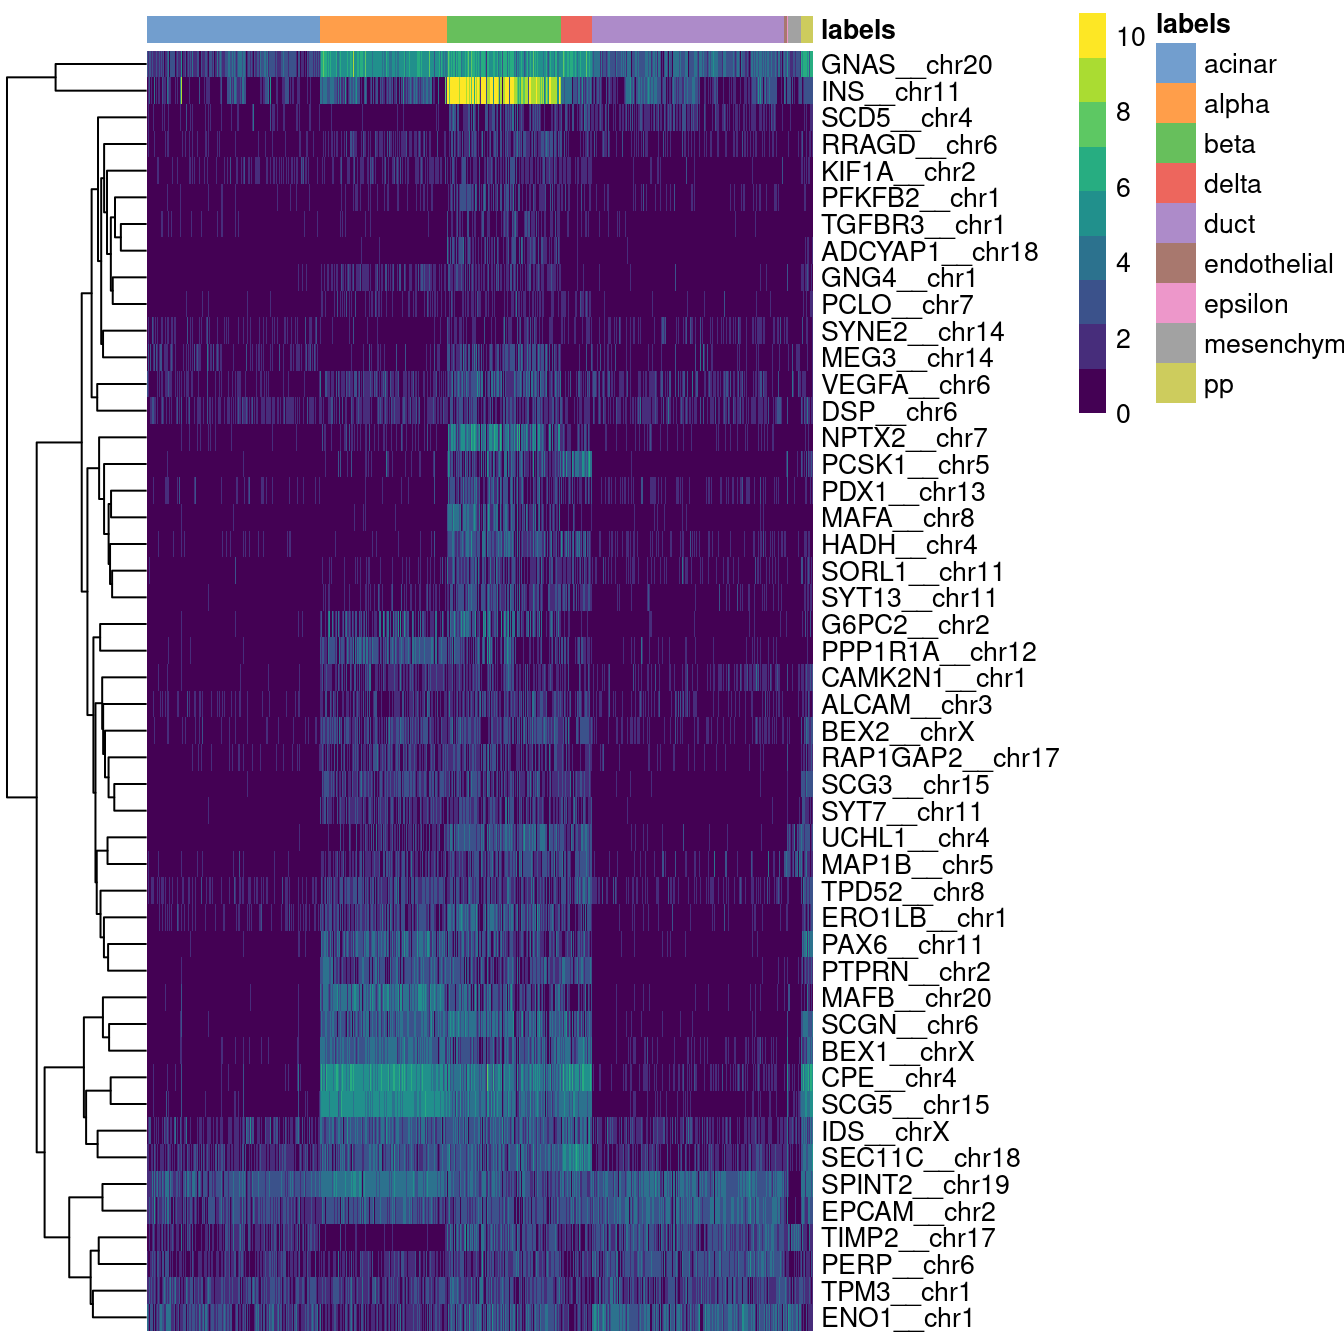 Heatmap of log-expression values in the Grun dataset for all marker genes upregulated in beta cells in the Muraro reference dataset. Assigned labels for each cell are shown at the top of the plot.